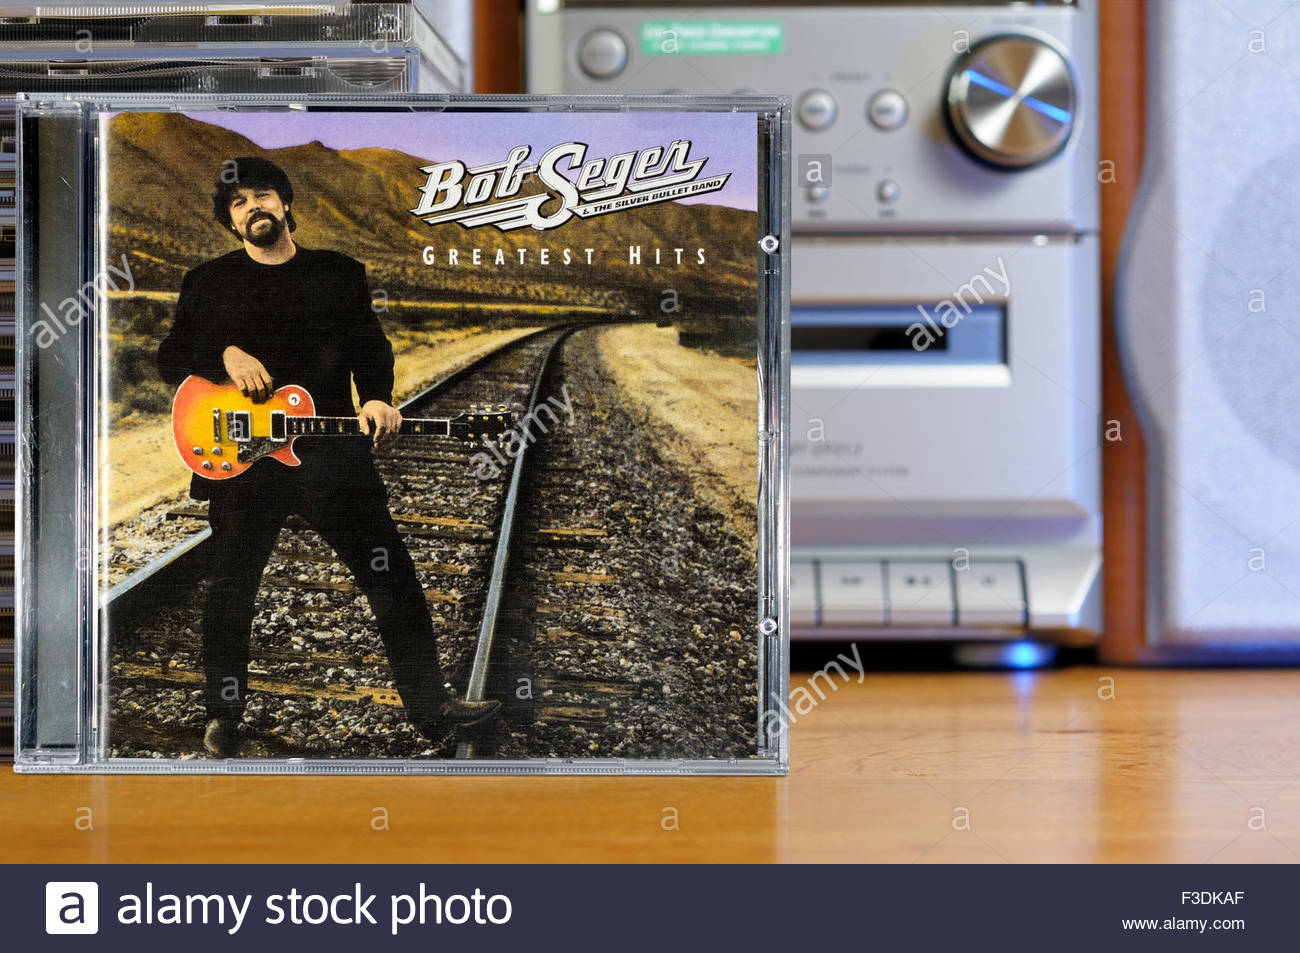 bob seger and the silver bullet band greatest hits download